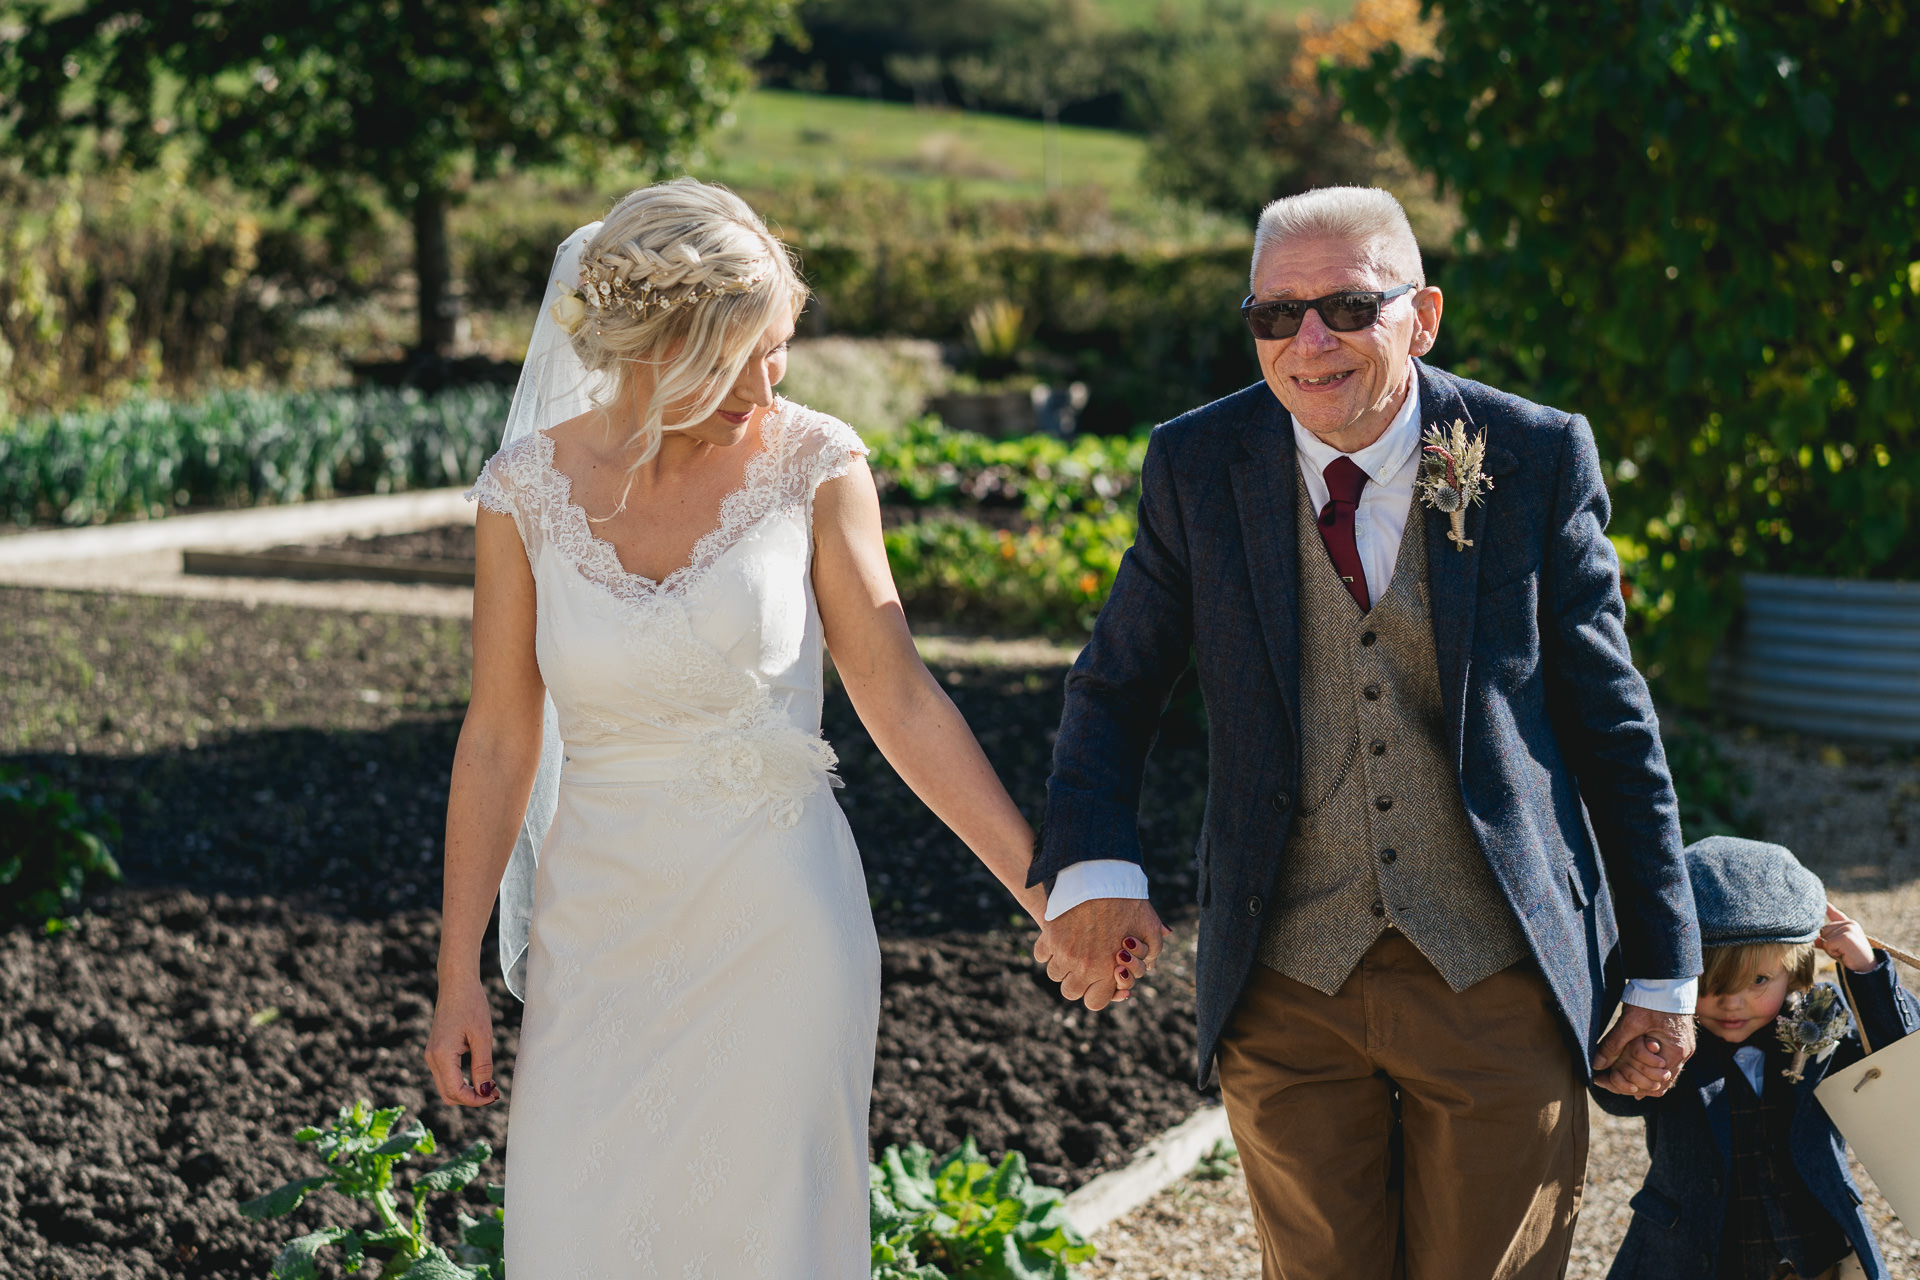 Bride hand in hand with her father walking through the garden